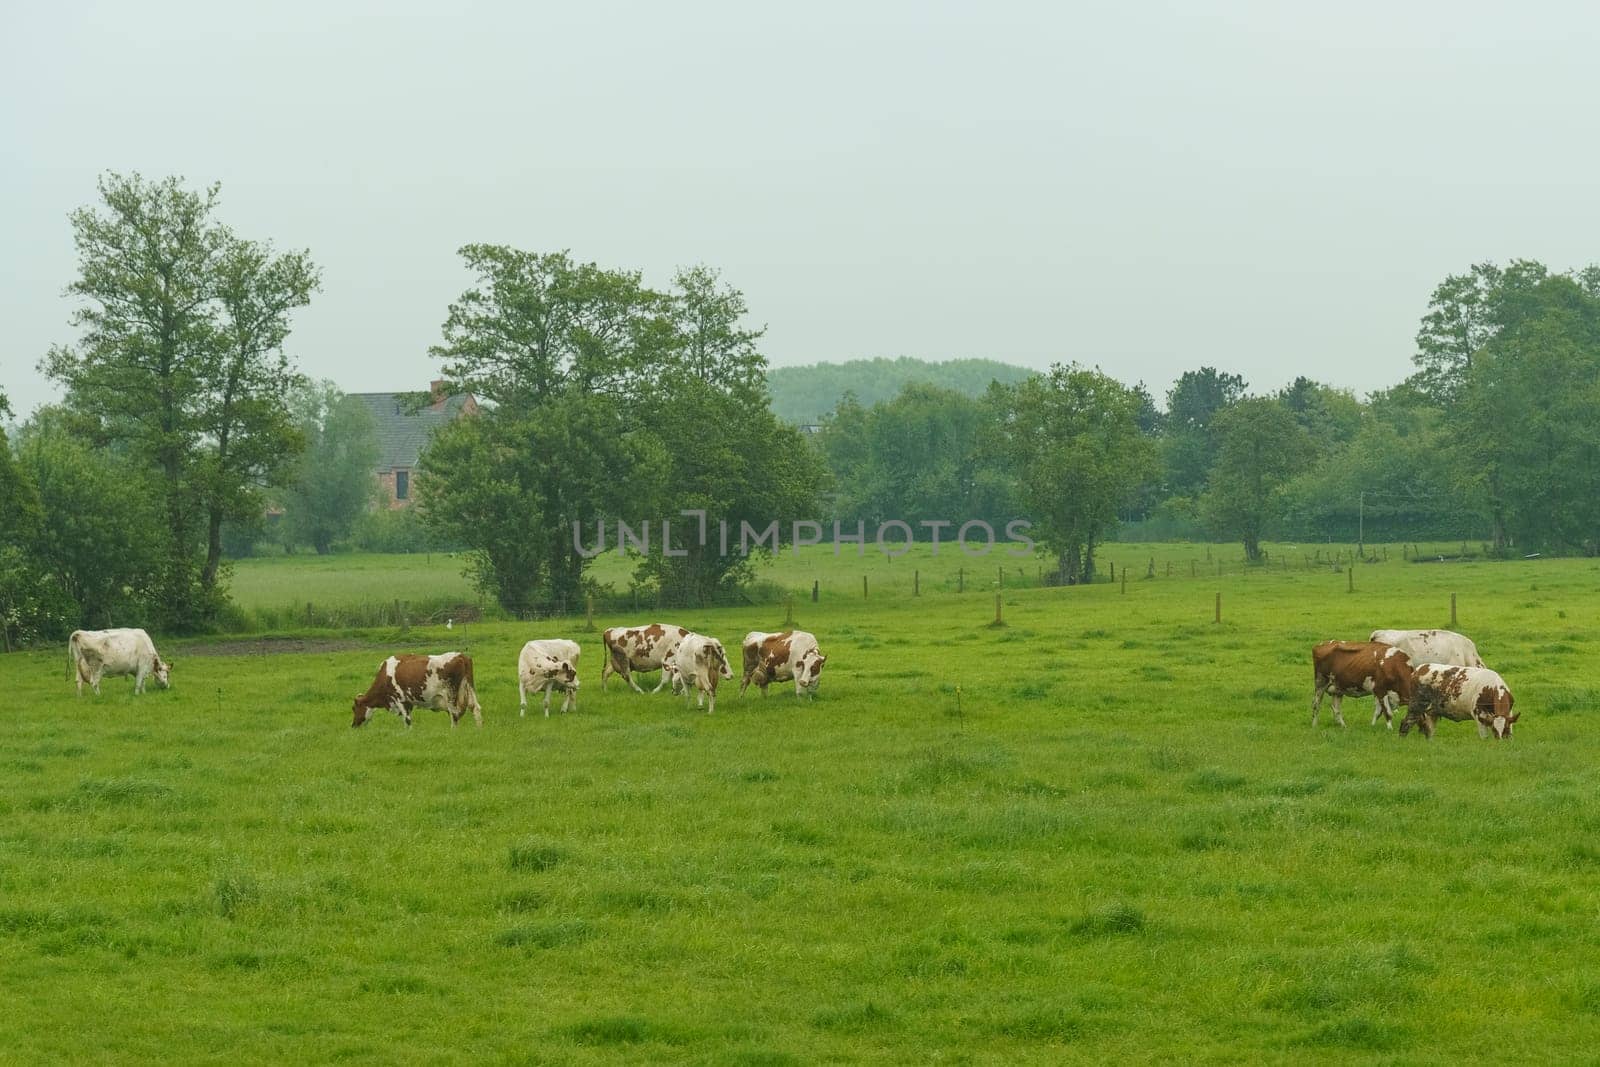 Calm rural scene with cows grazing in a lush green pasture in cloudy weather. by Sd28DimoN_1976